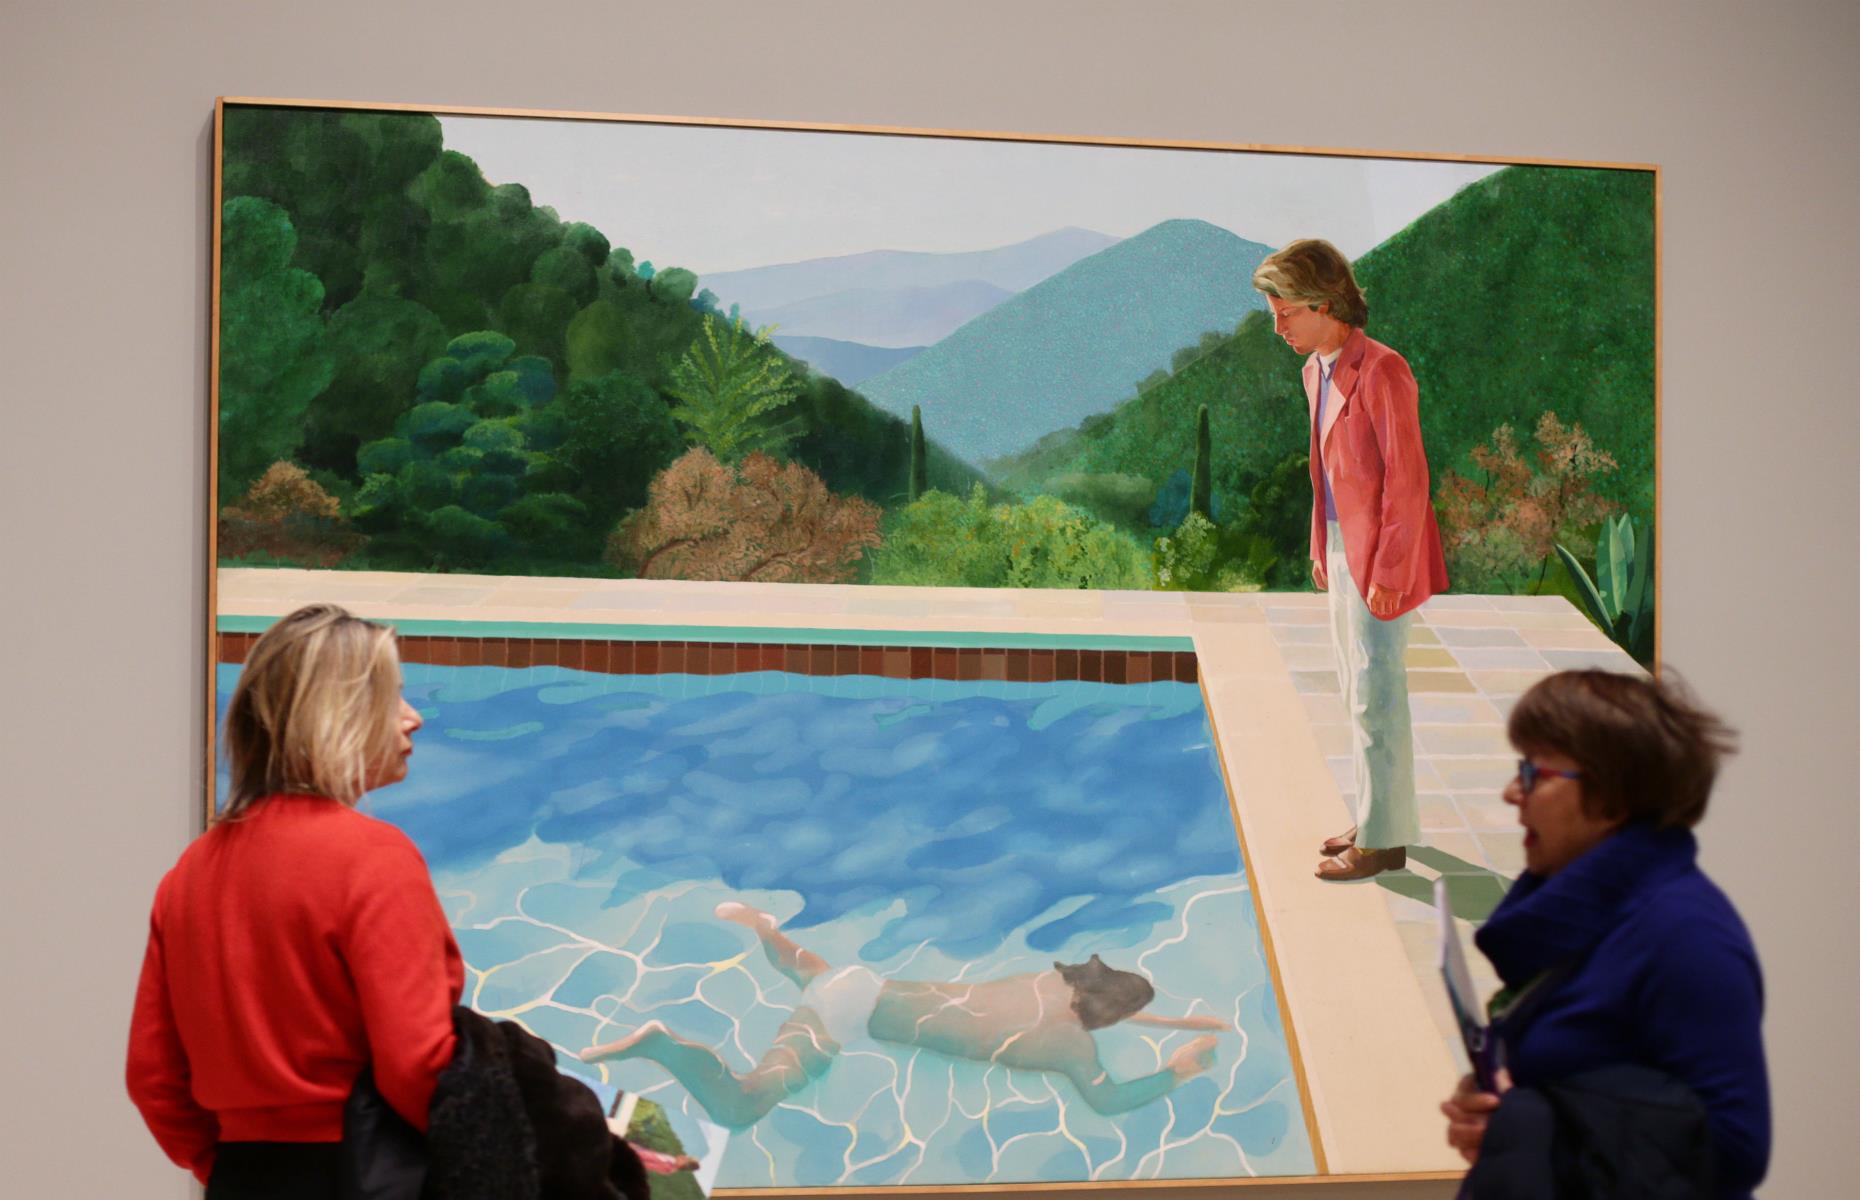 David Hockney, Portrait of an Artist (Pool with Two Figures) – $90.3 million (£70.6m)